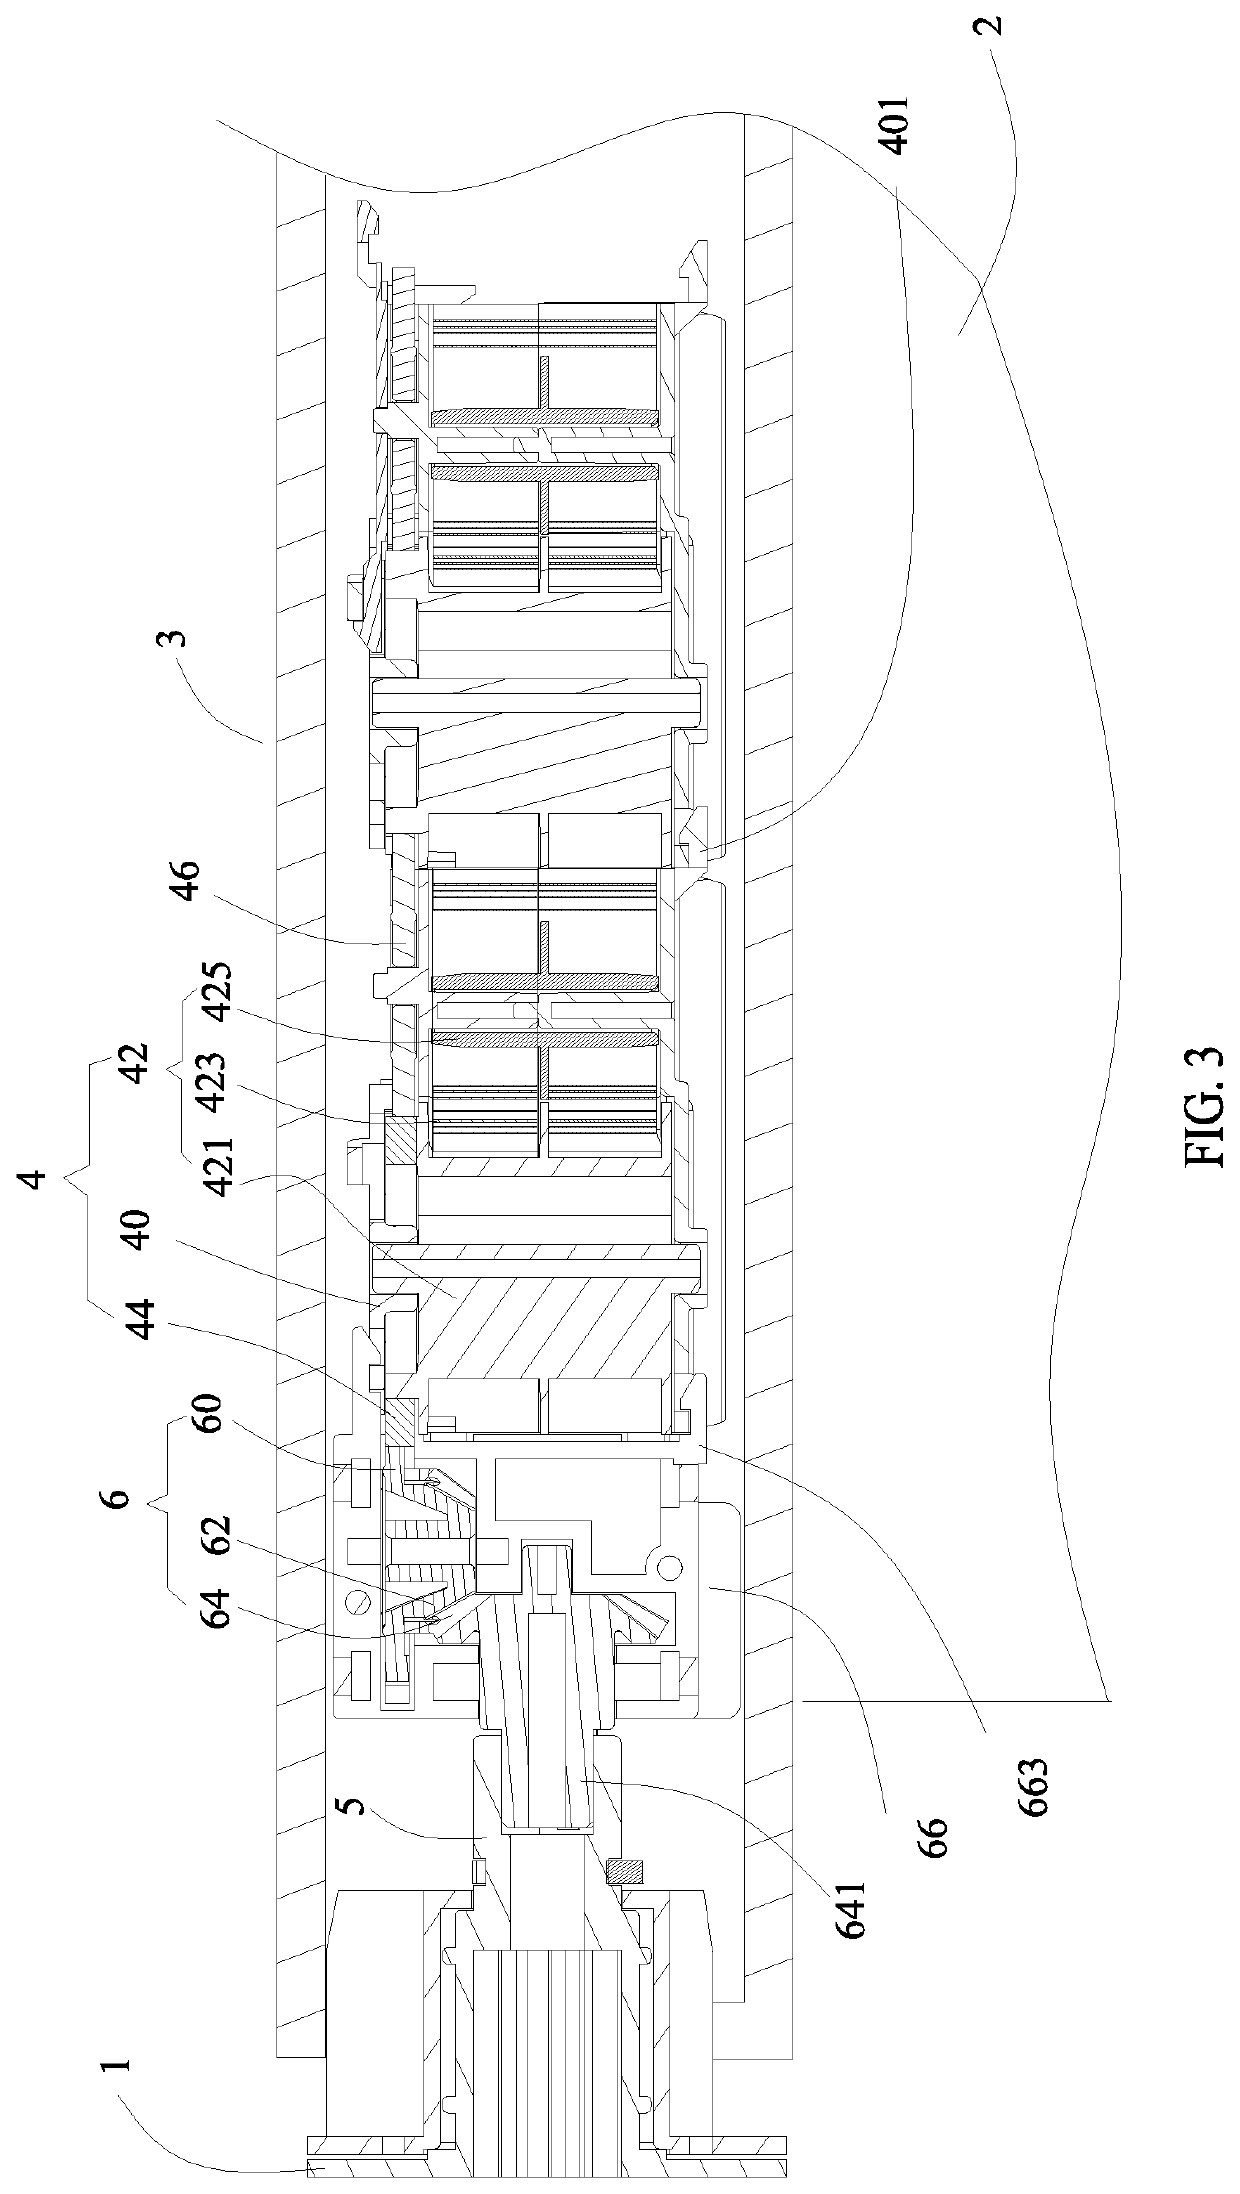 Roller shade actuation device